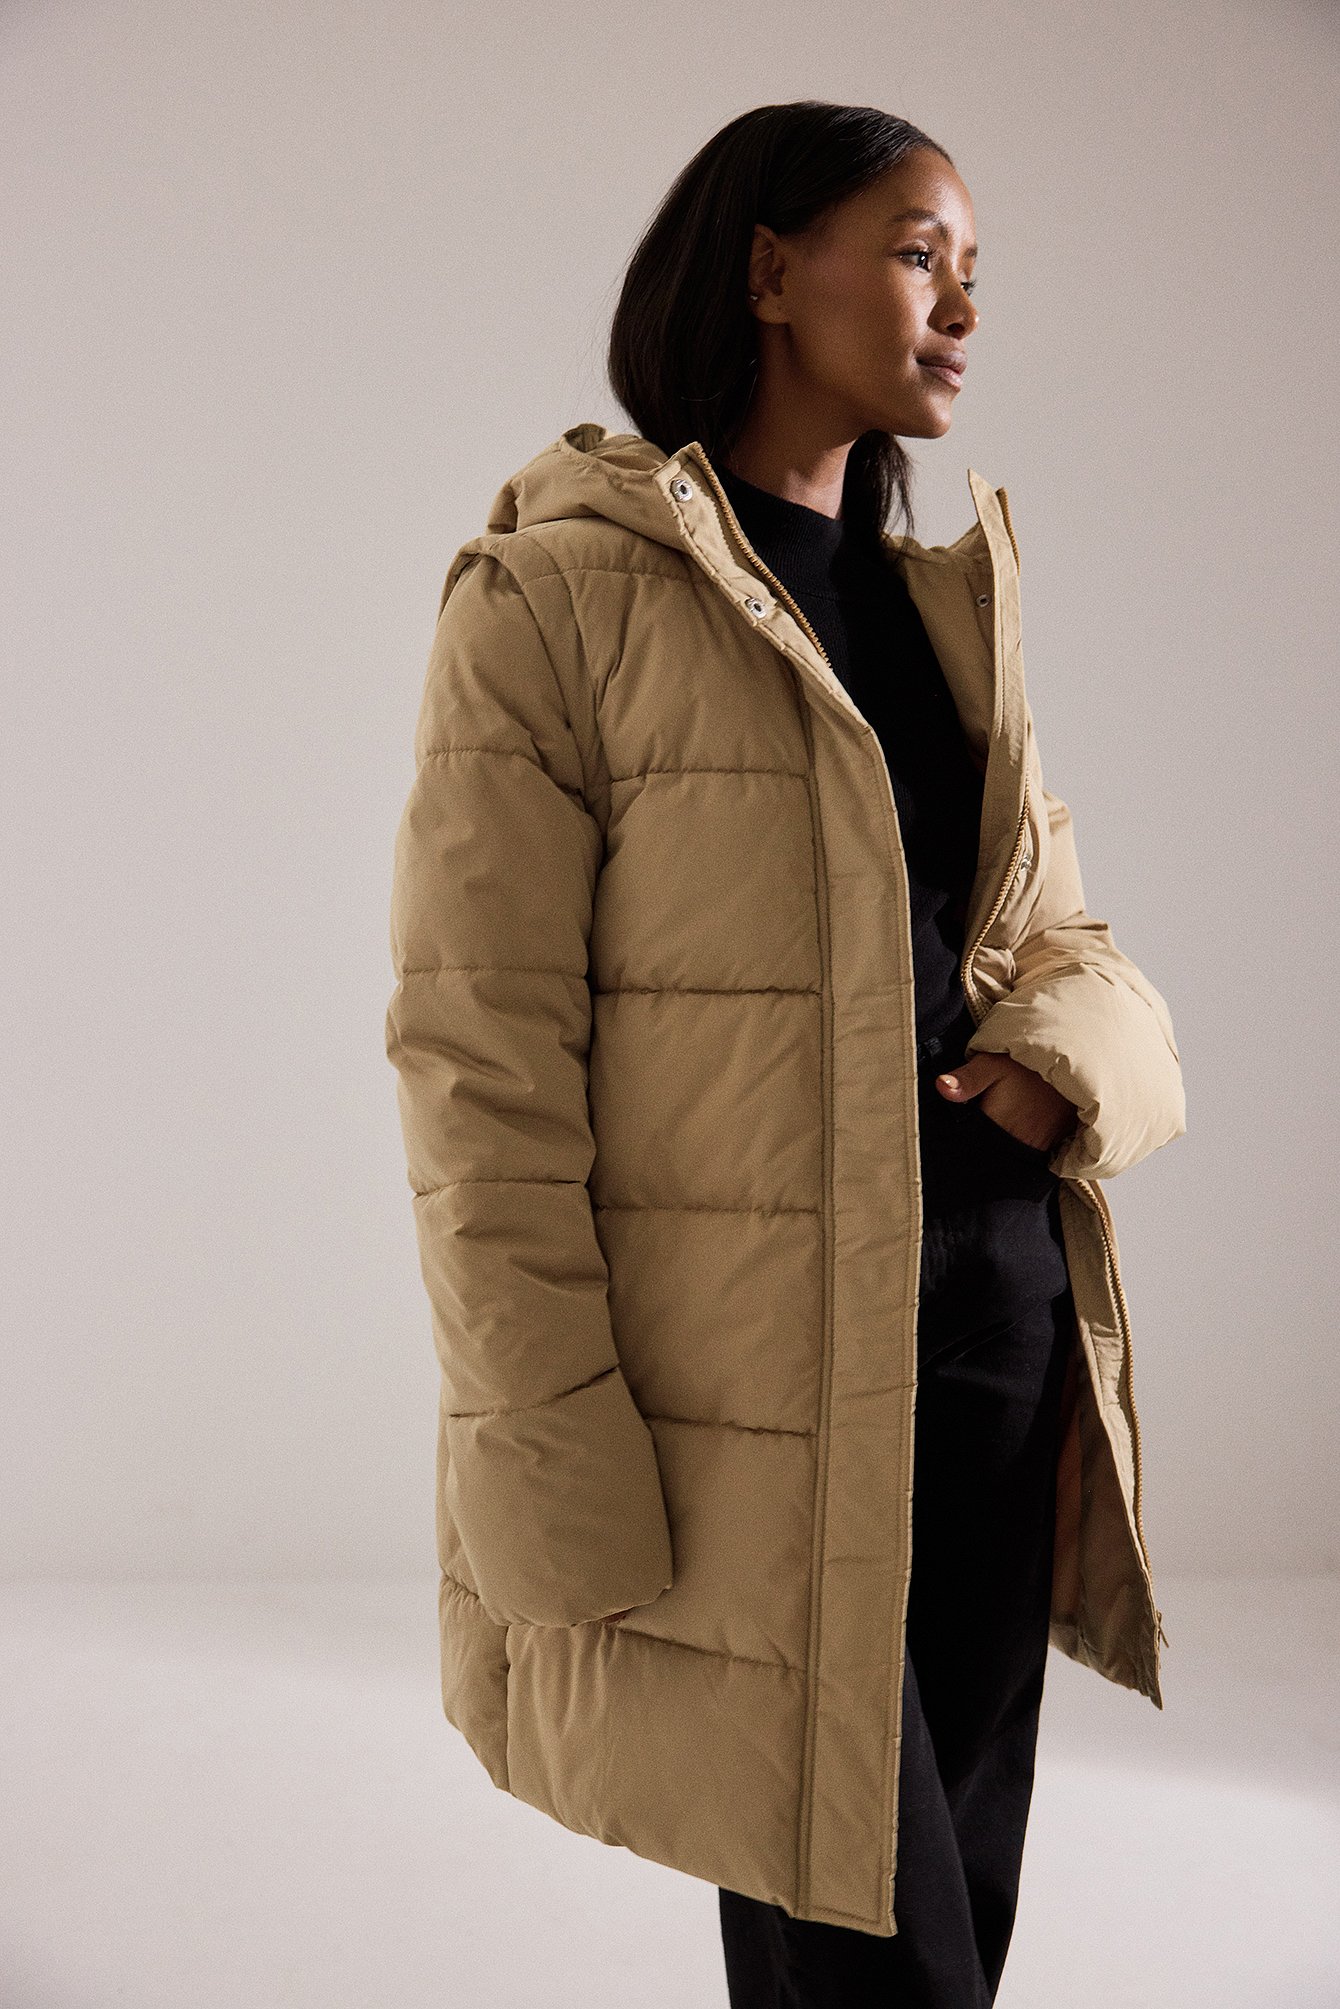 anika teller x na-kd removable sleeves long padded jacket - beige